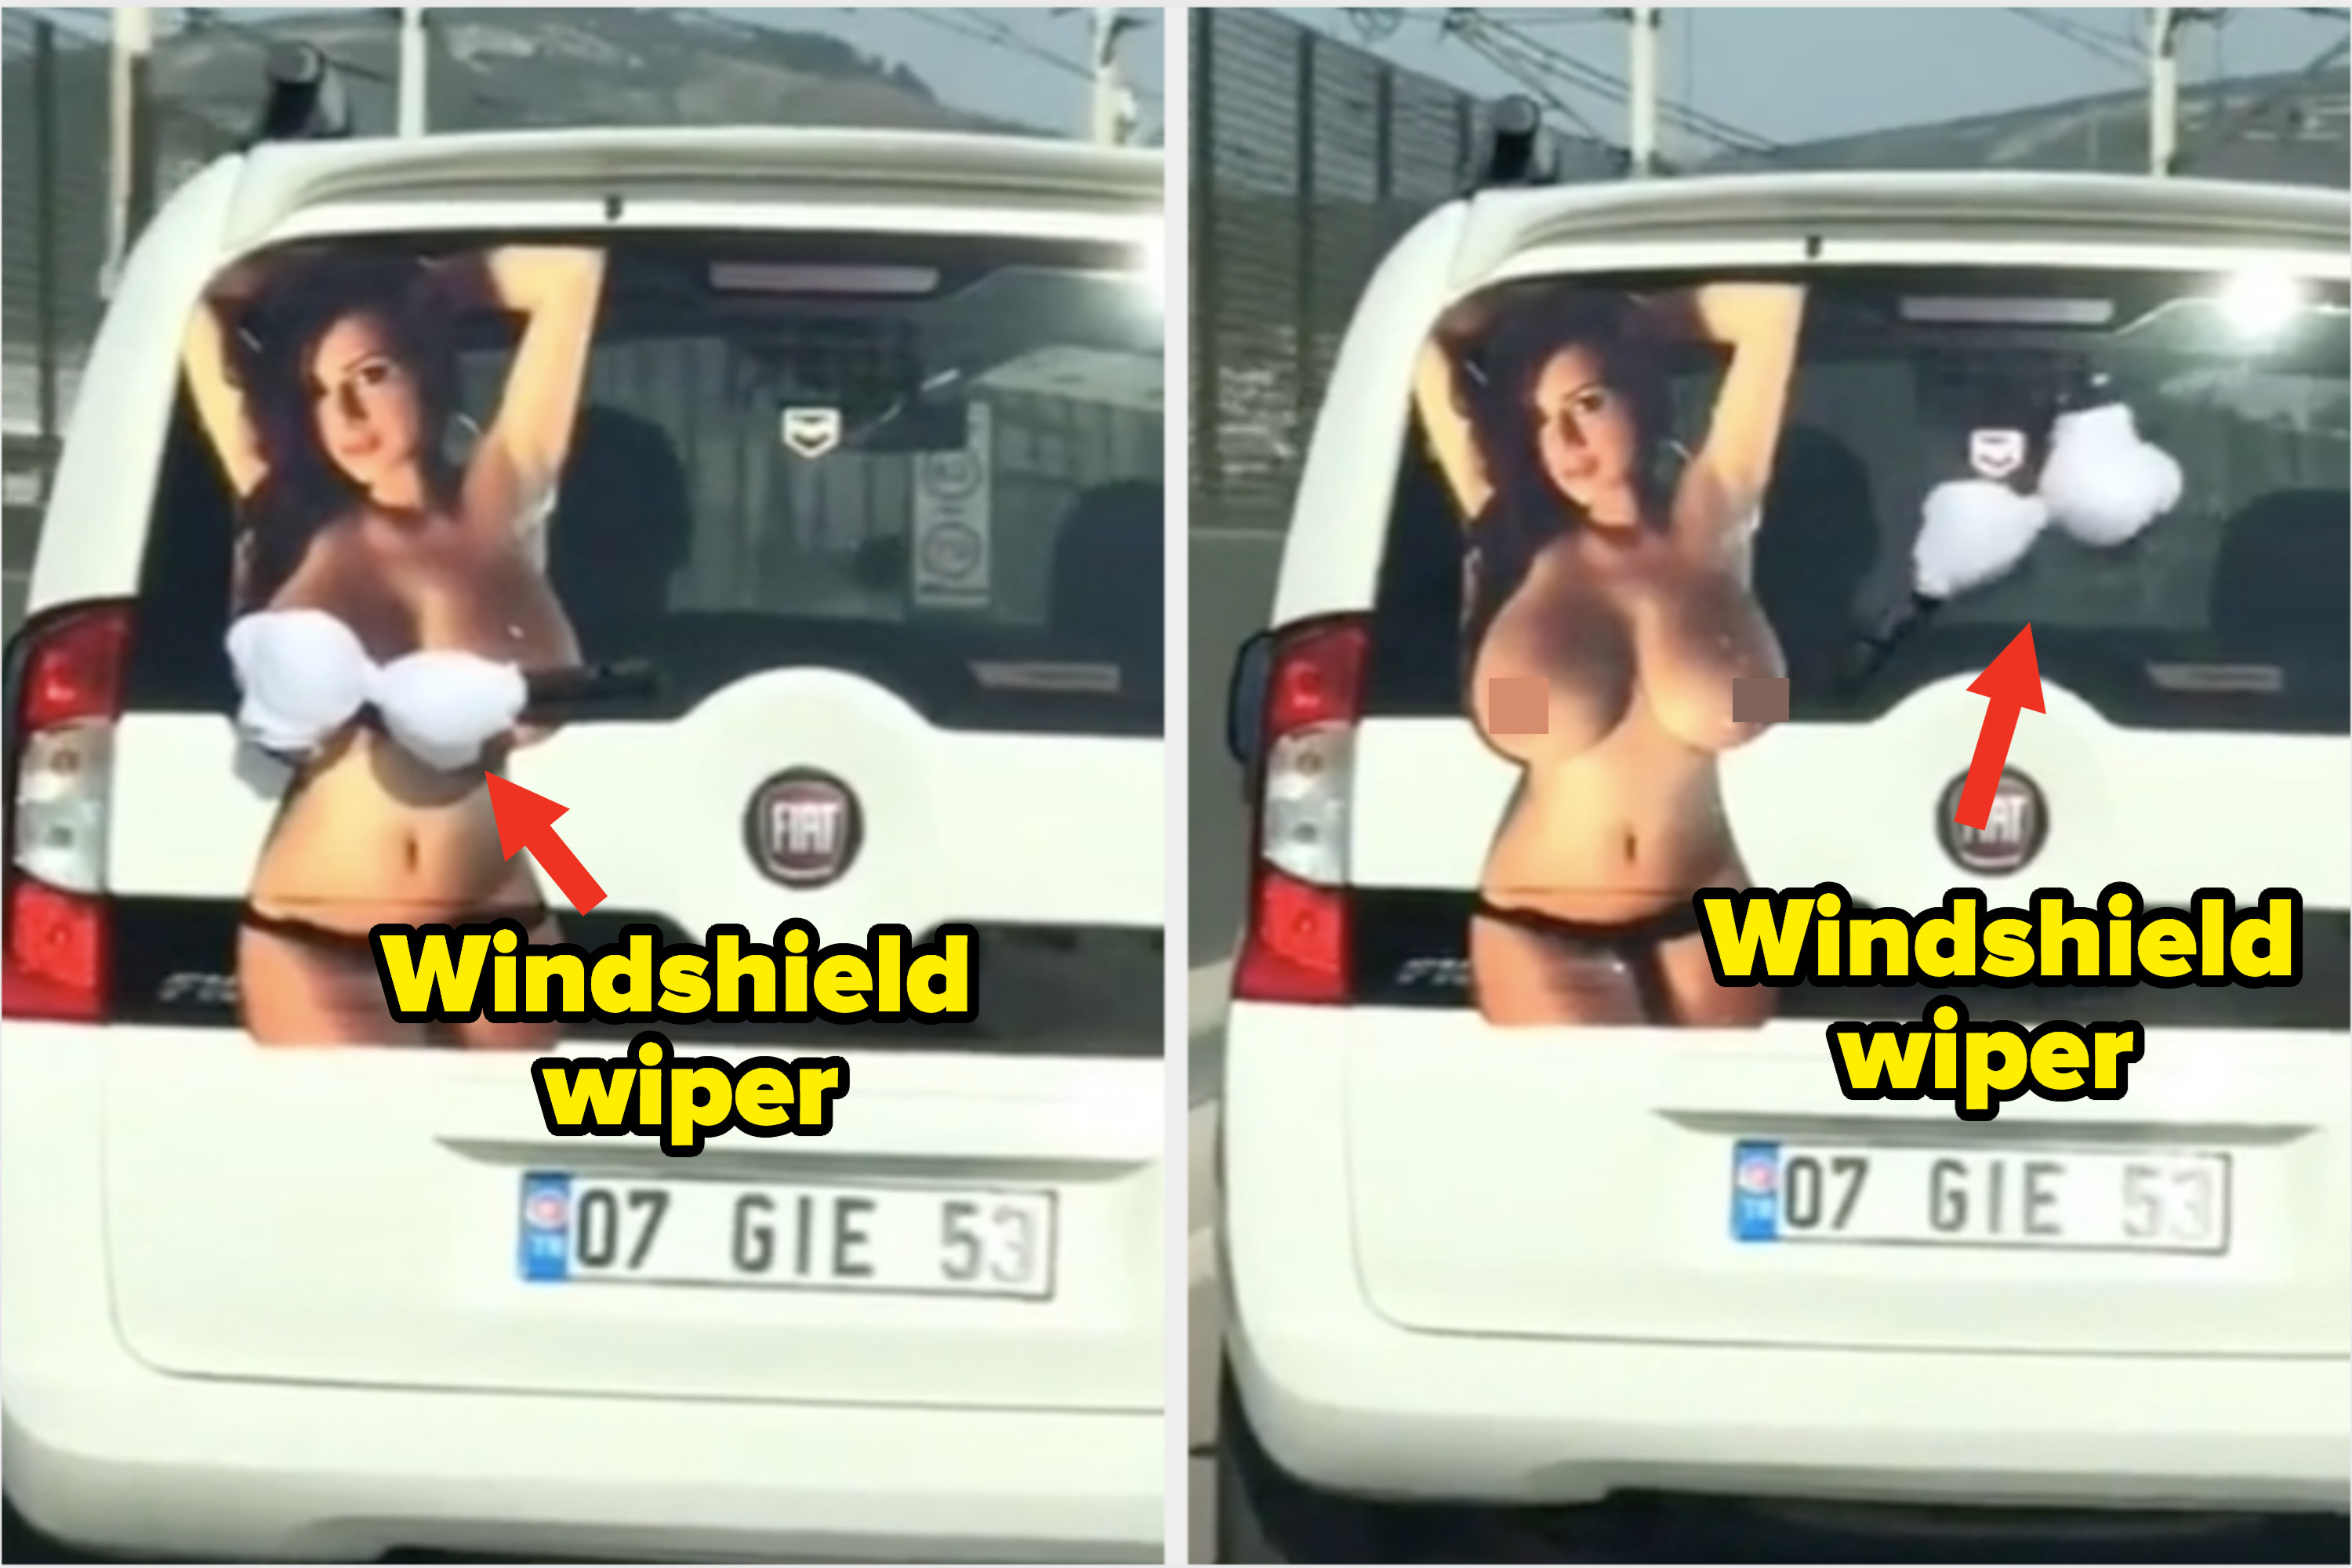 Windshield wipers showing a woman&#x27;s breasts